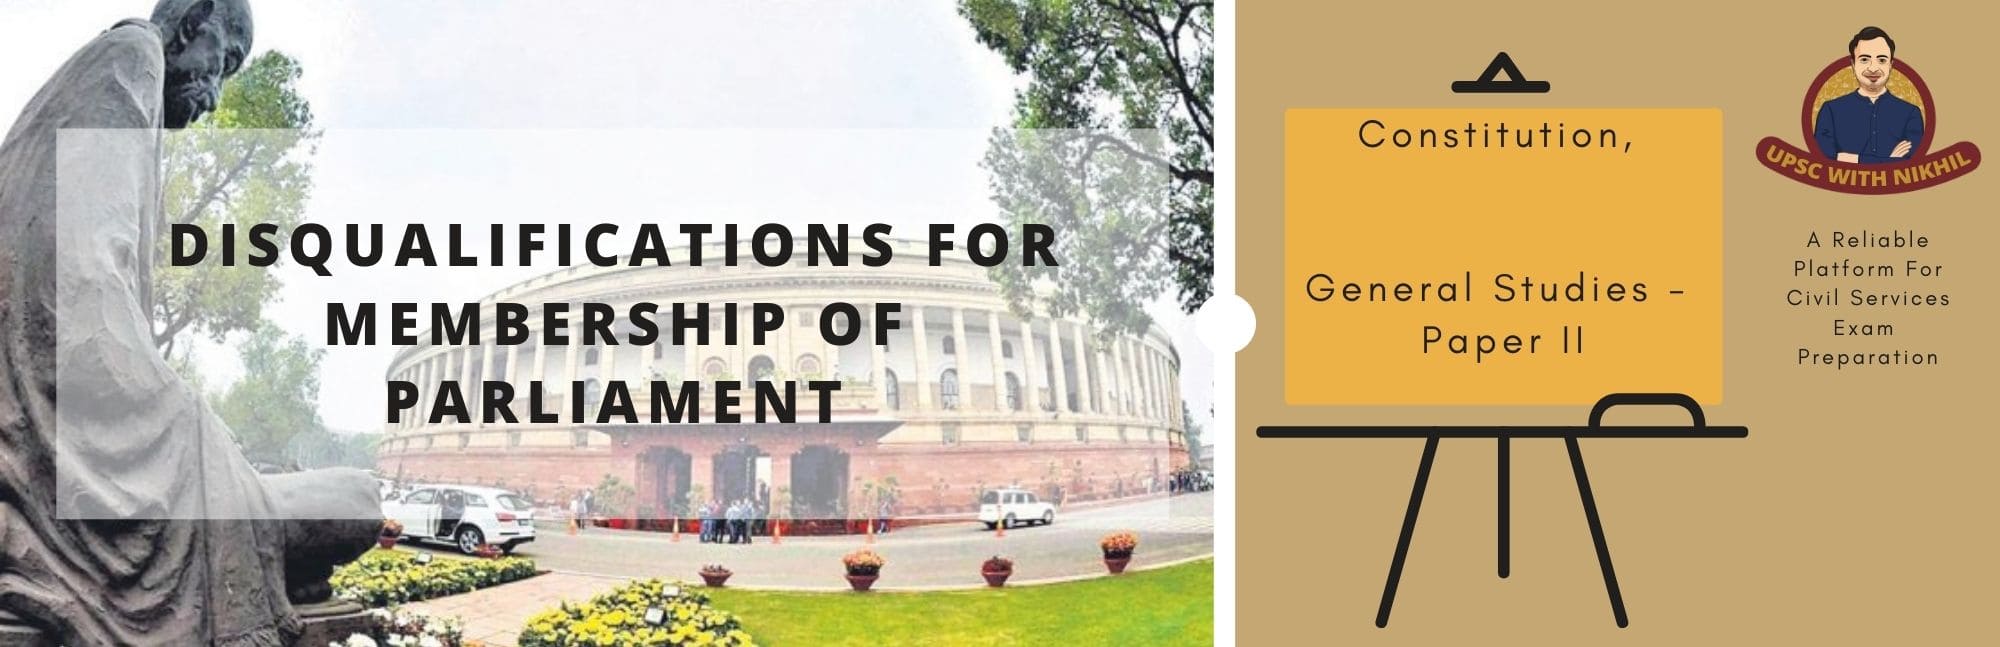 Disqualifications For Membership of Parliament